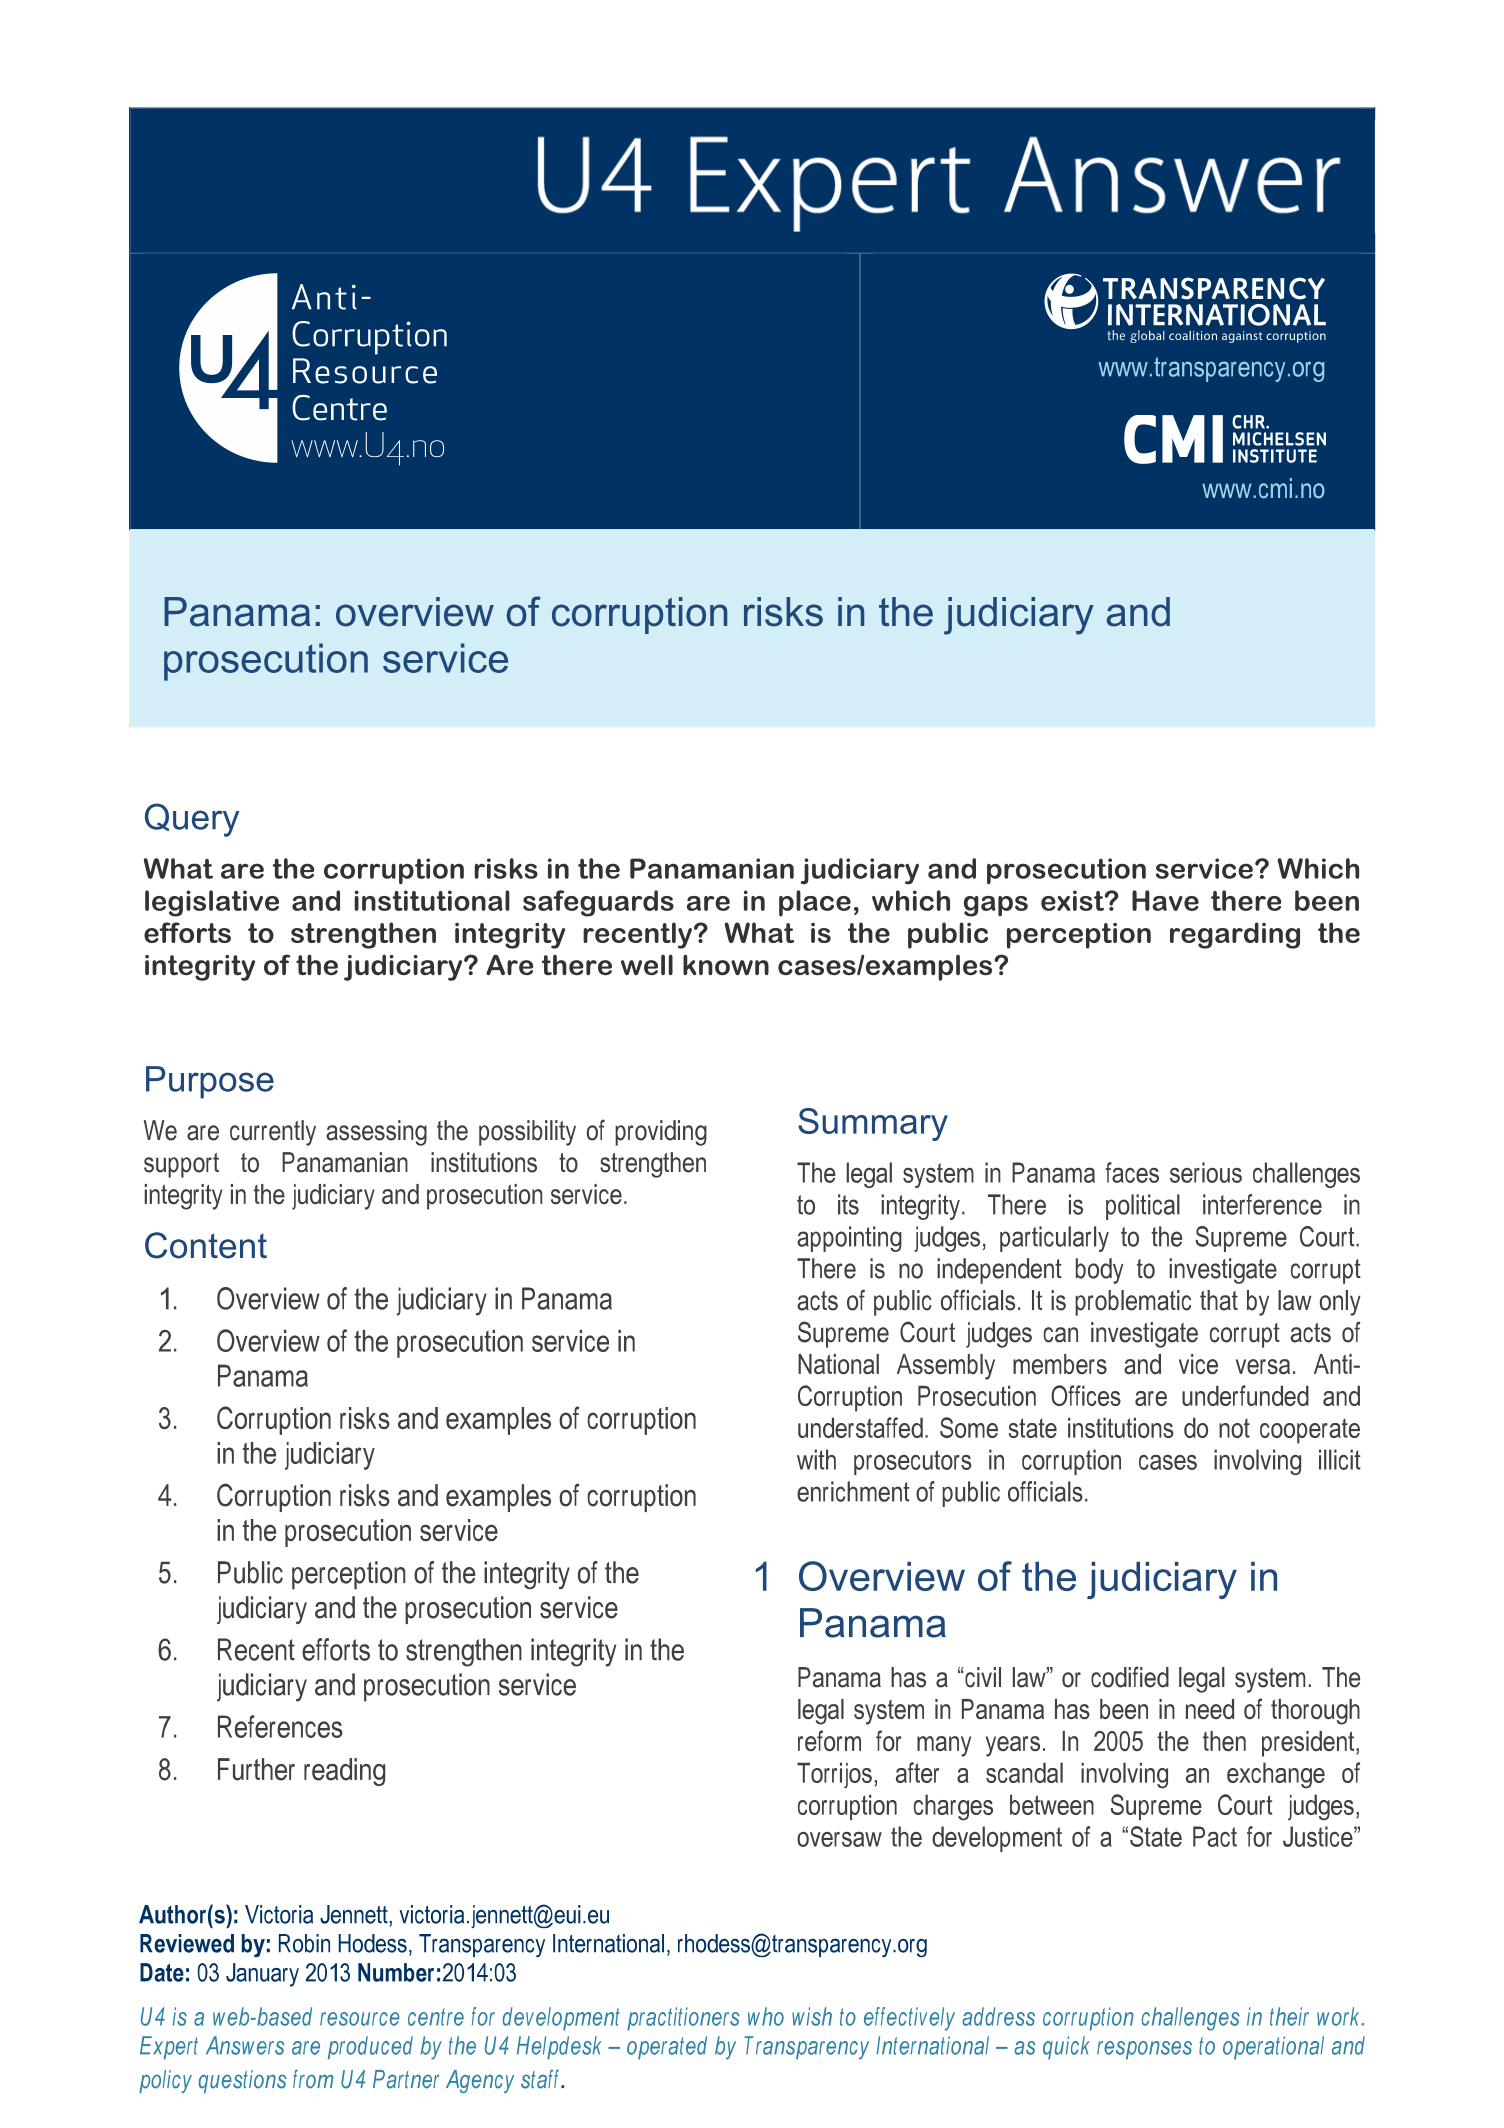 Panama: overview of corruption risks in the judiciary and prosecution service